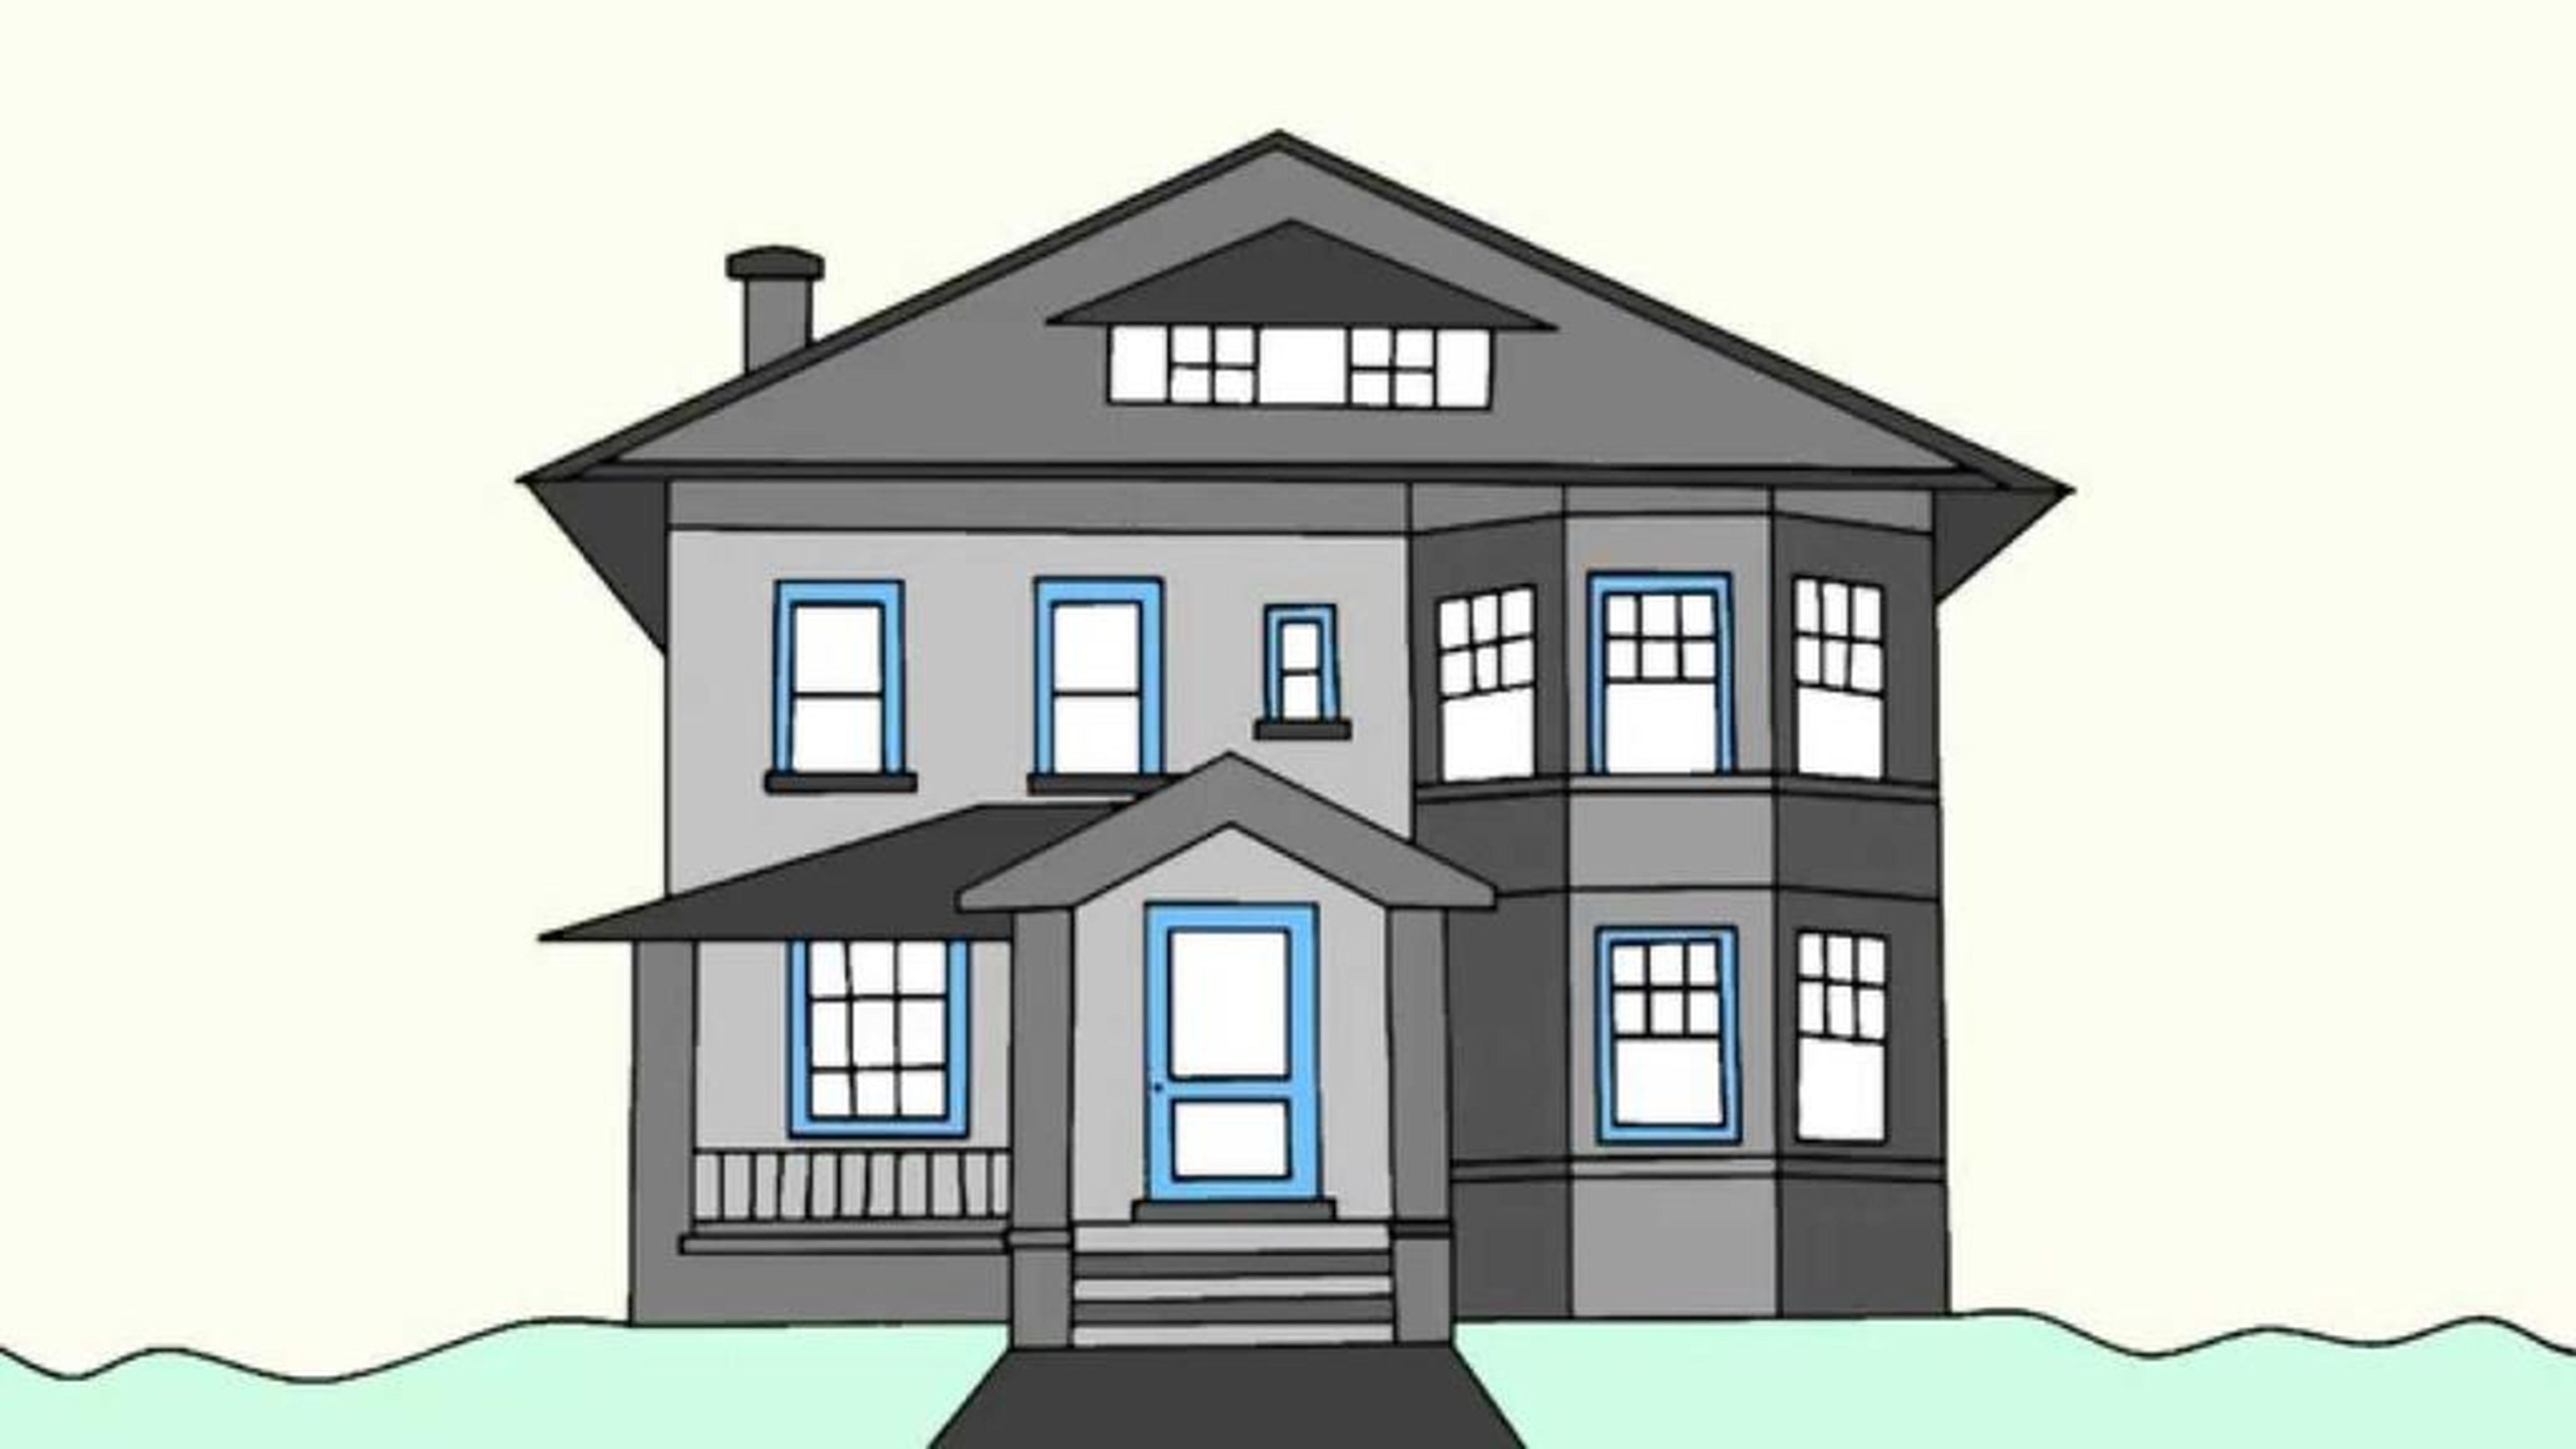 How To Draw A Mansion Step By Step